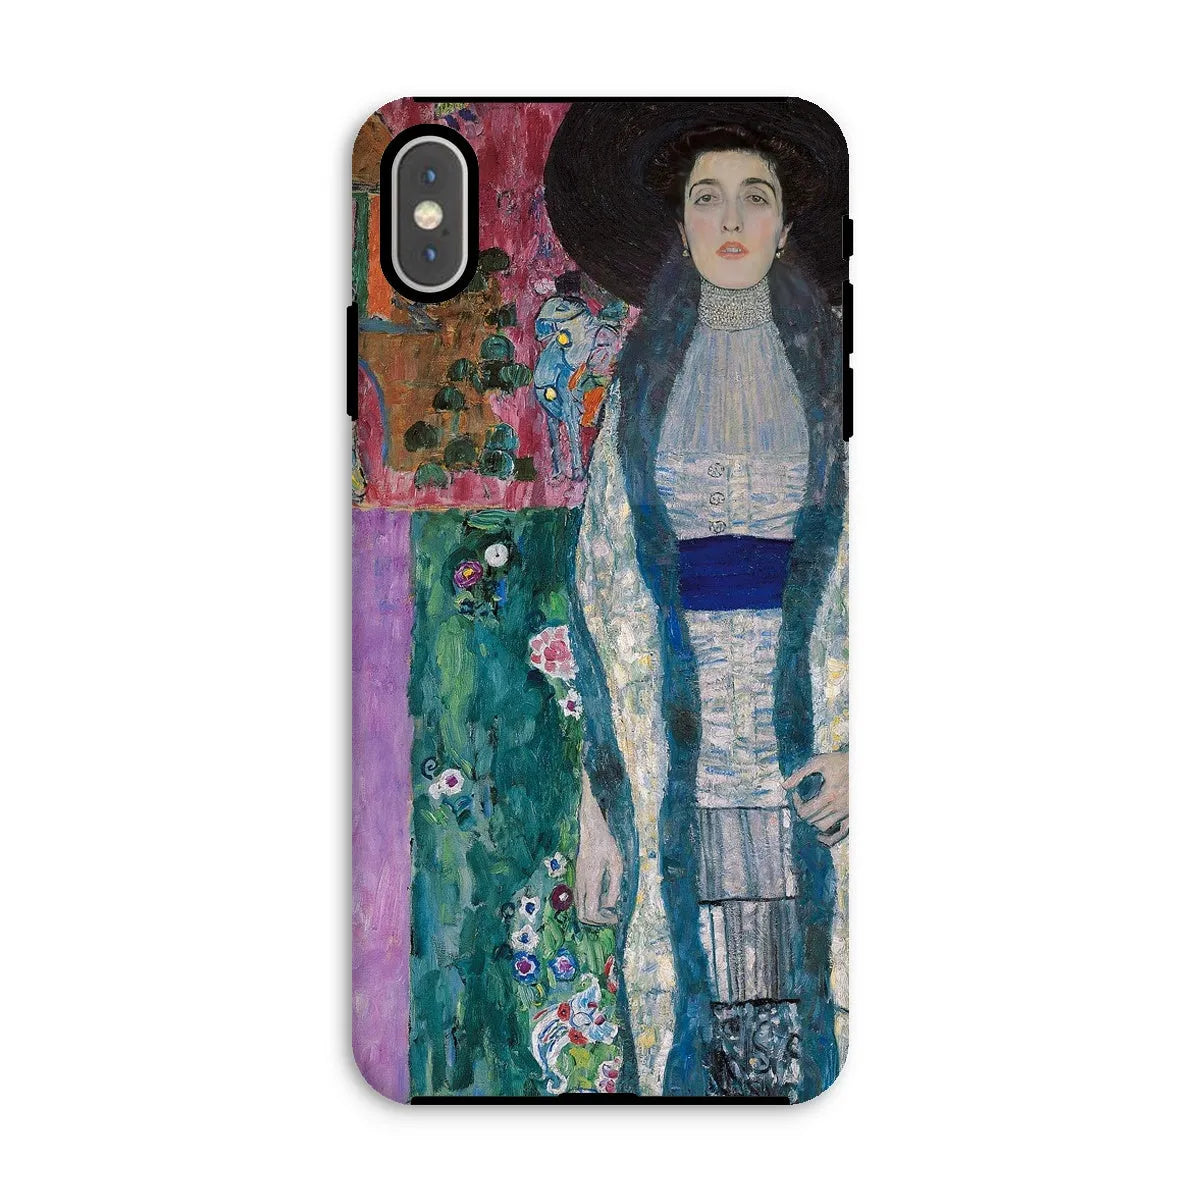 Adele Bloch-bauer By Gustav Klimt Tough Phone Case - Iphone Xs Max / Matte - Mobile Phone Cases - Aesthetic Art